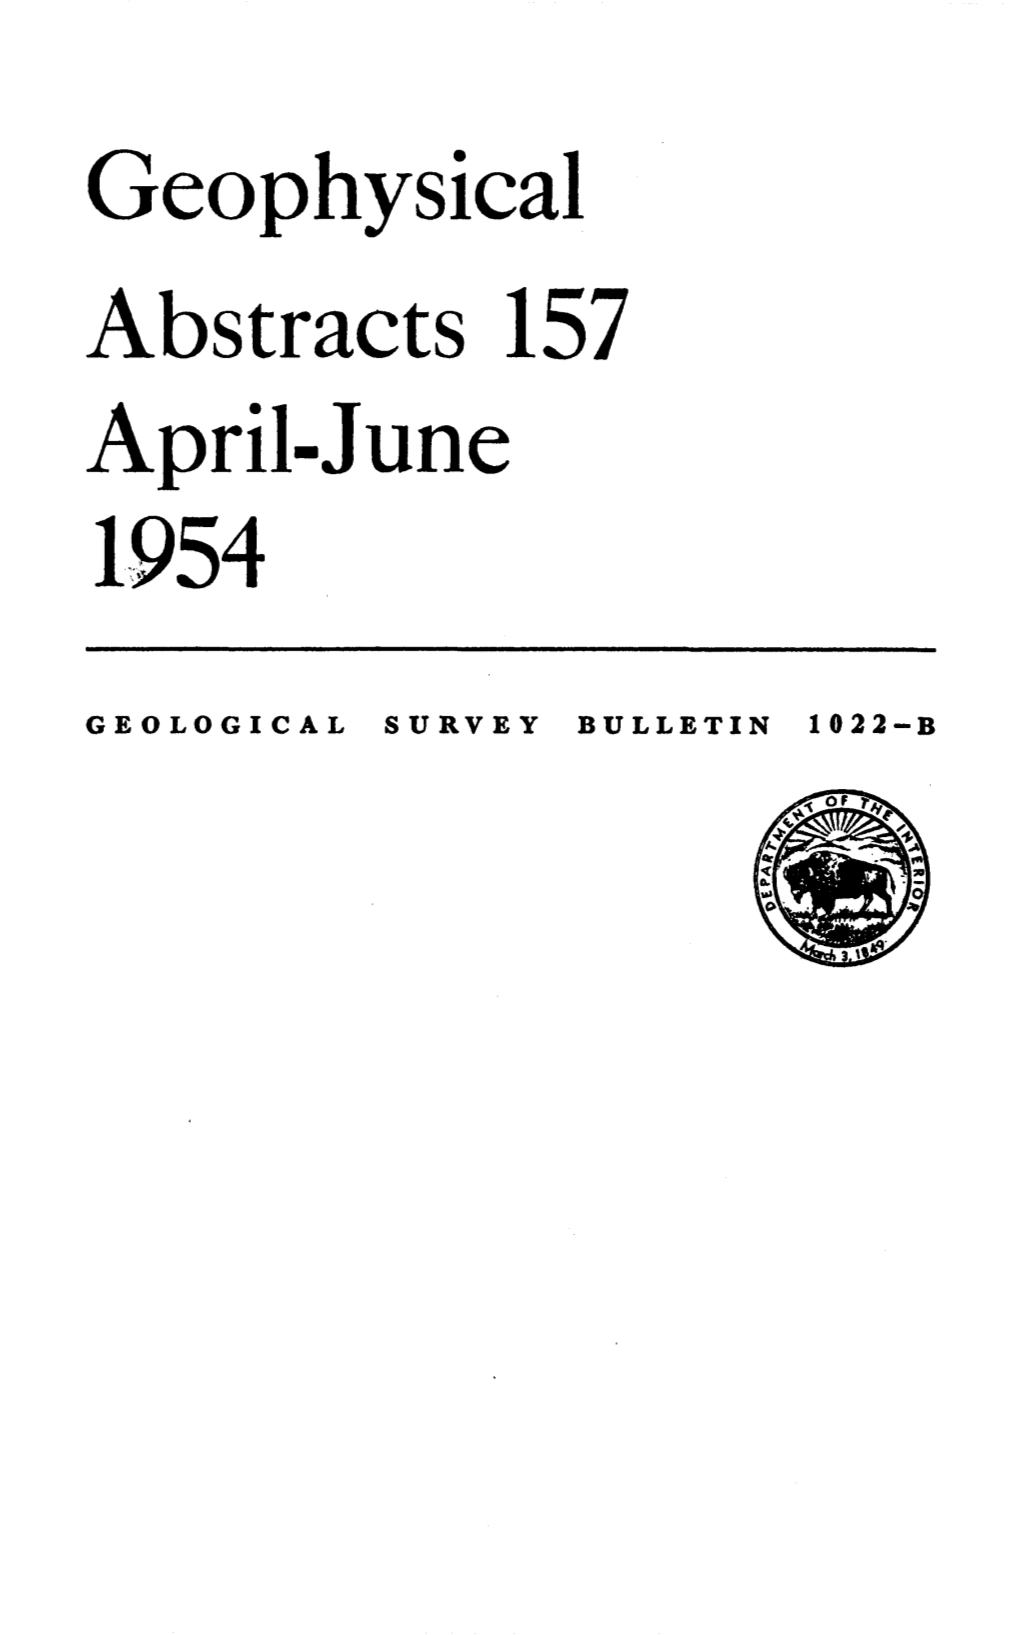 Geophysical Abstracts 157 April-June 1954